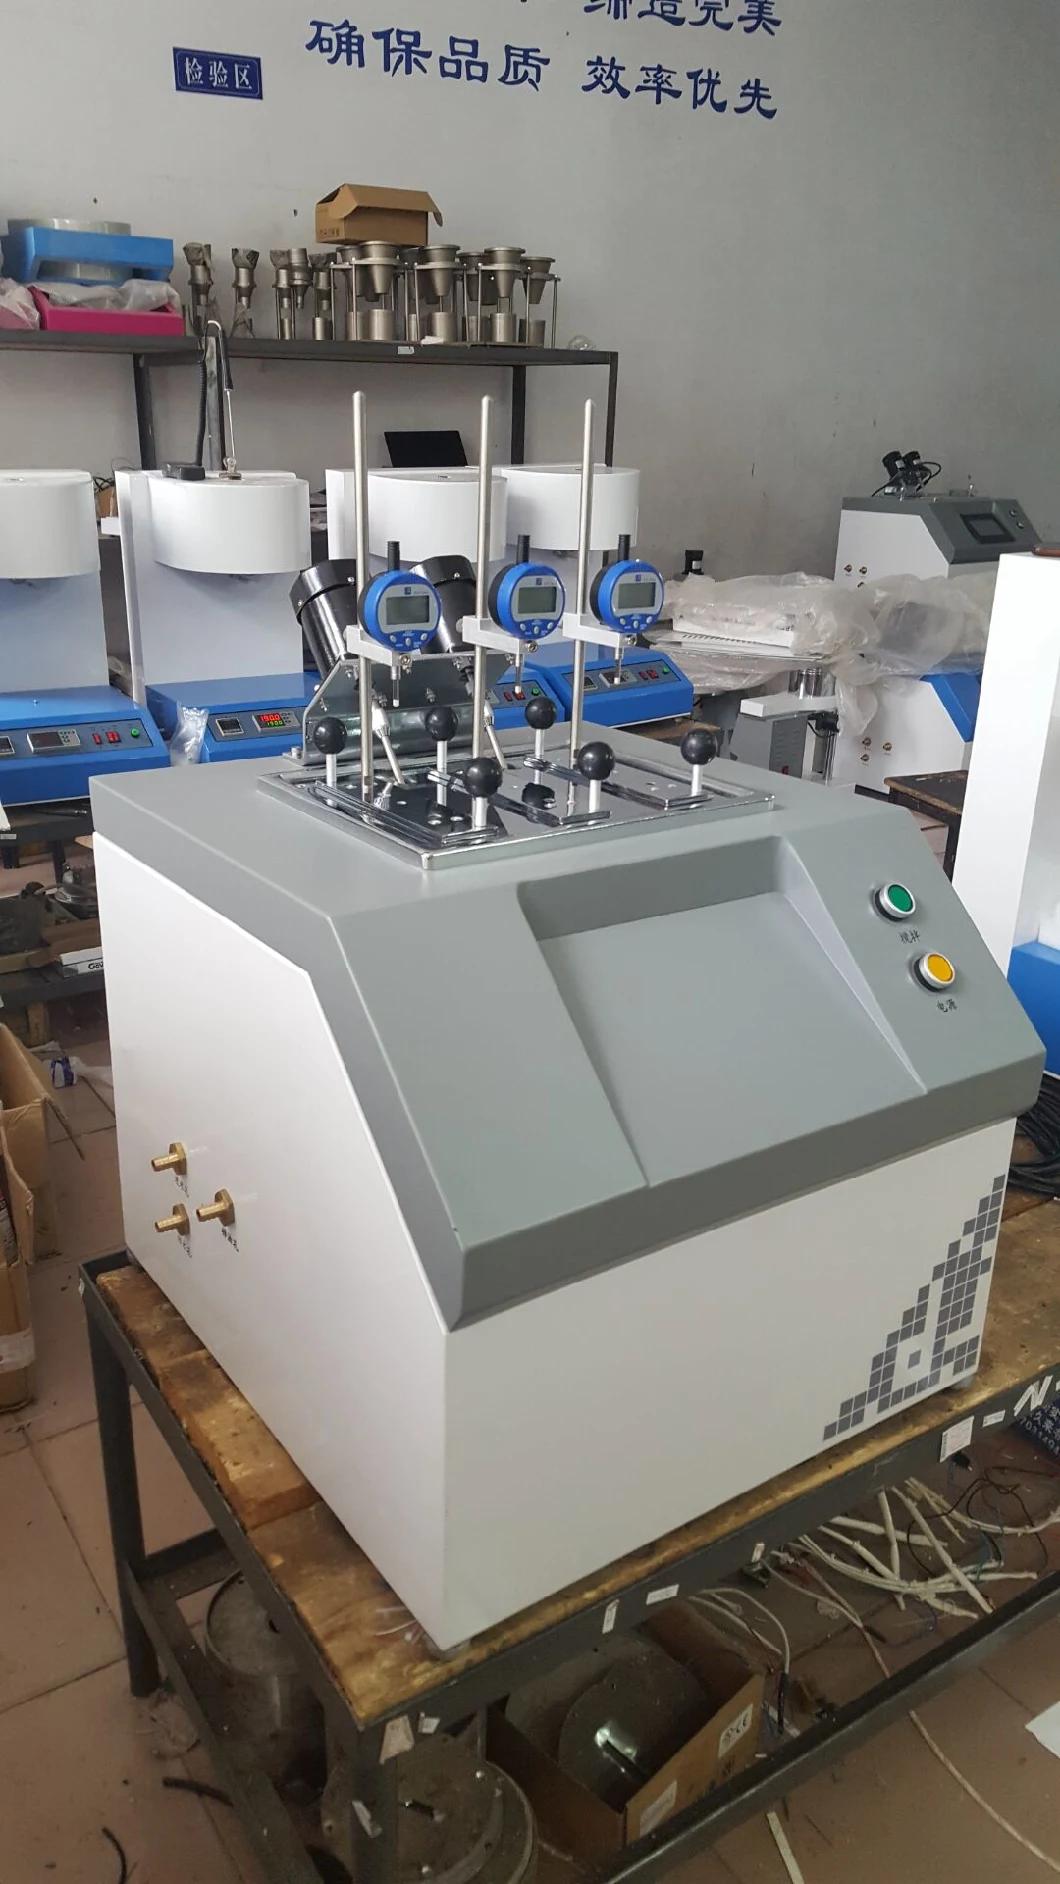 ERW-300ha Non-Metallic Materials Plastic Rubber Nylon Hdt Vicat Softening Temperature Point Testing Machine Thermal Deformation and Vicat Softening Point Tester